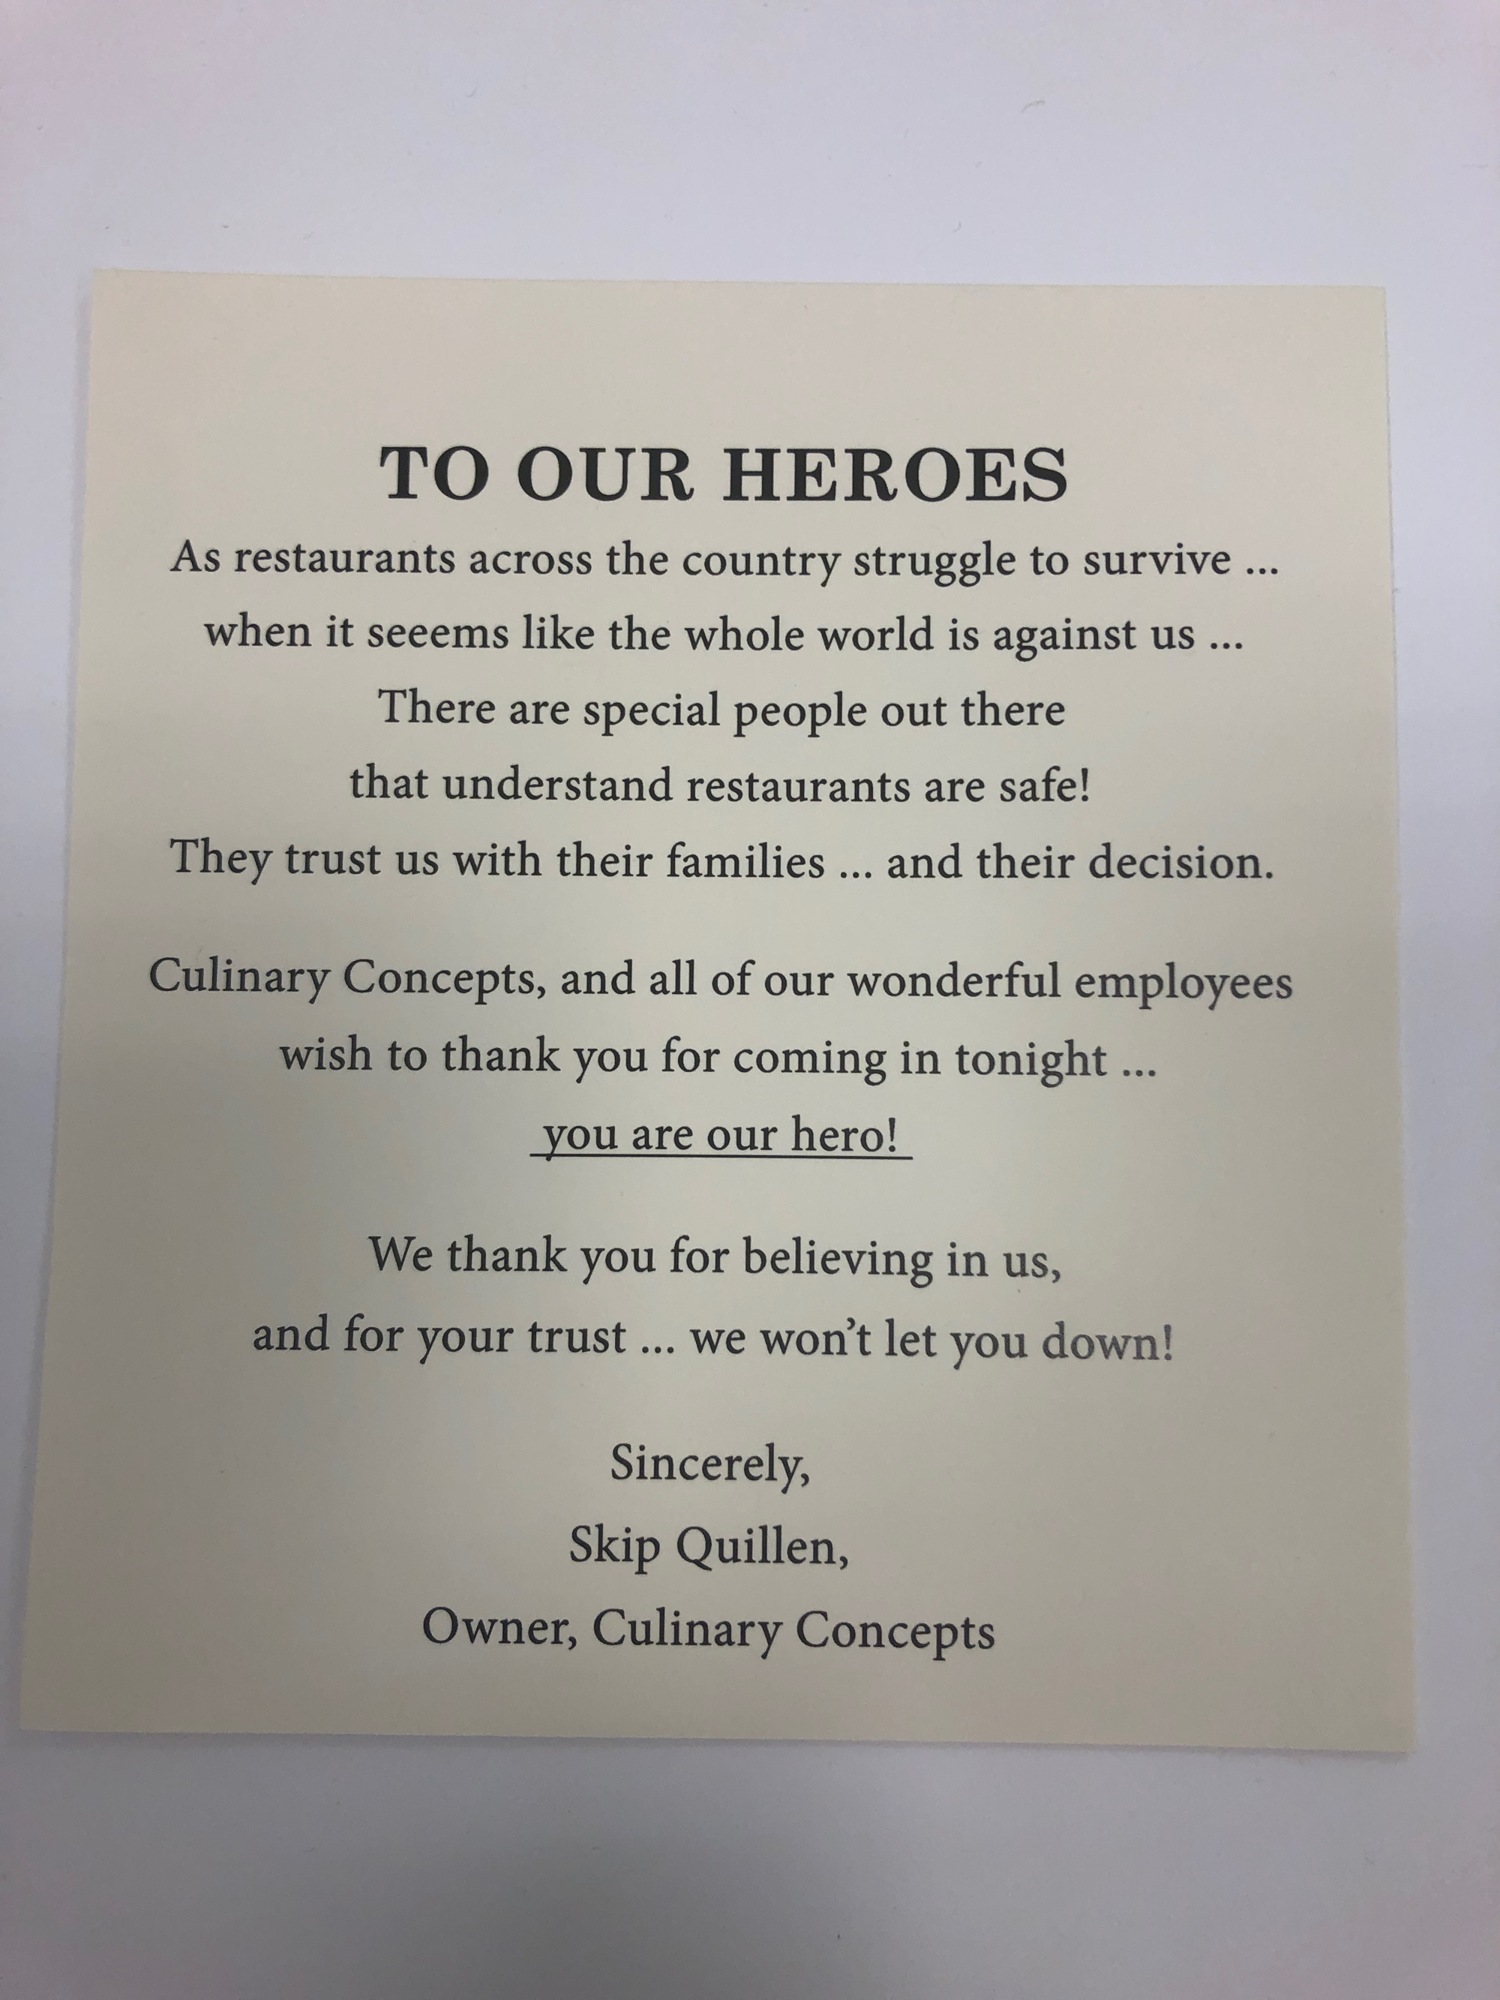 Courtesy. All the customers who come to one of the five Culinary Concepts locations get this note. 